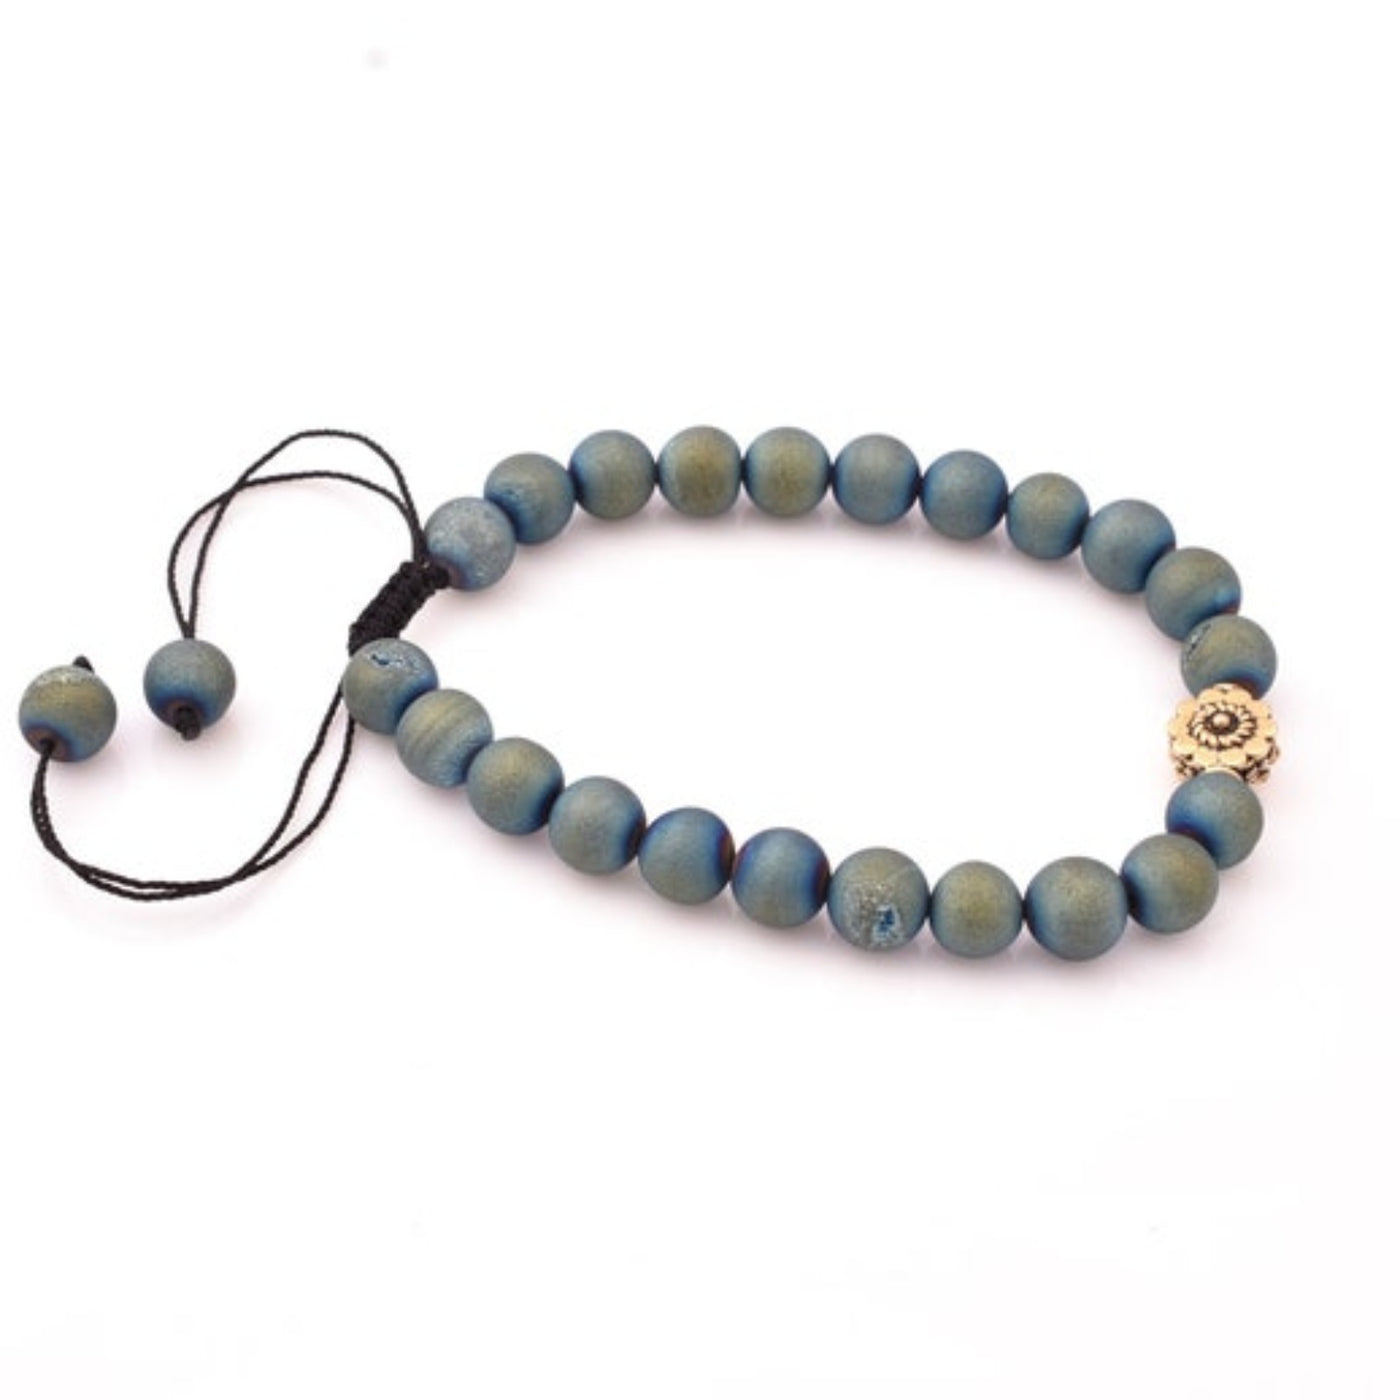 Adjustable Druzy Bracelet, Light  Blue Durzy Beaded Bracelet With Real Gold Plated Metal Beads